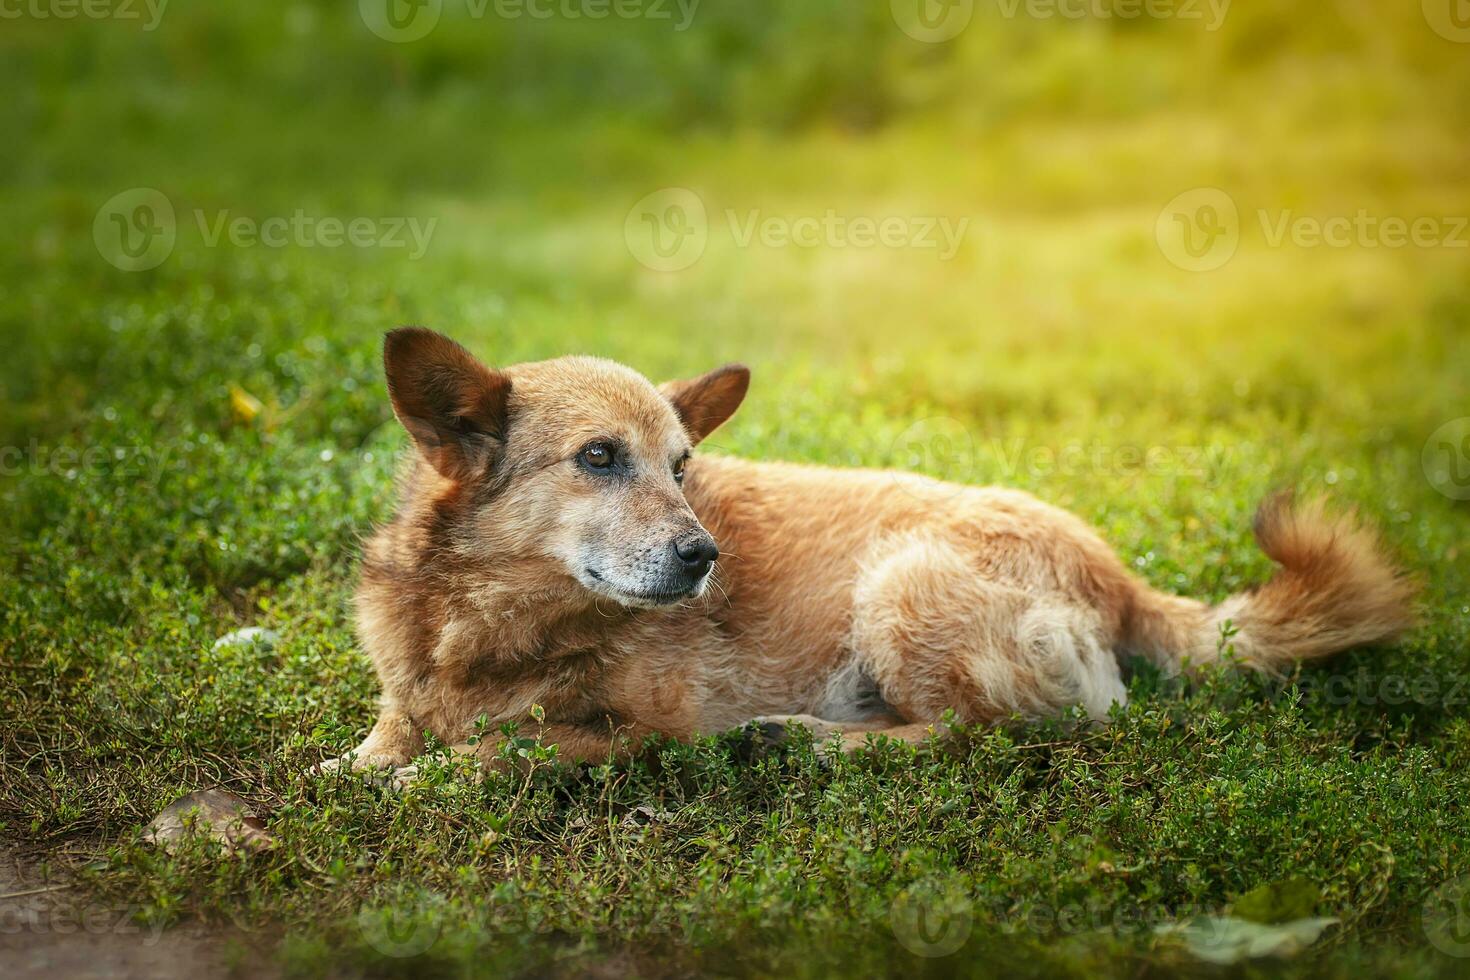 Mongrel dog of red color lies on its stomach on the grass, stretching its front paws forward. Spring photo